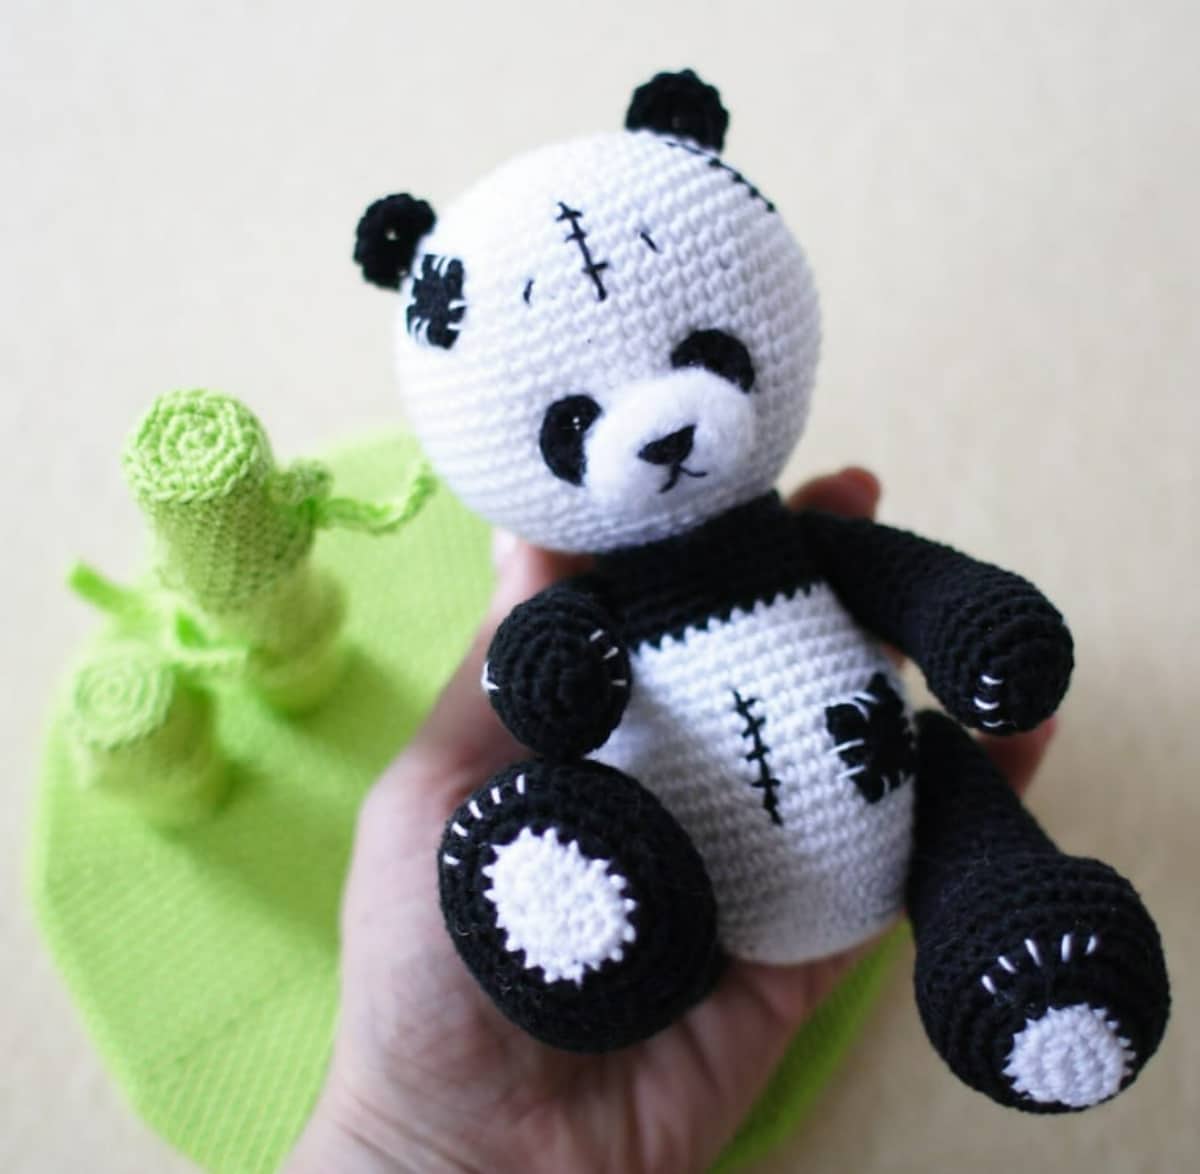 Black and white crochet panda with a black patch stitched on its stomach and stitches on its stomach held next to some green yarn.